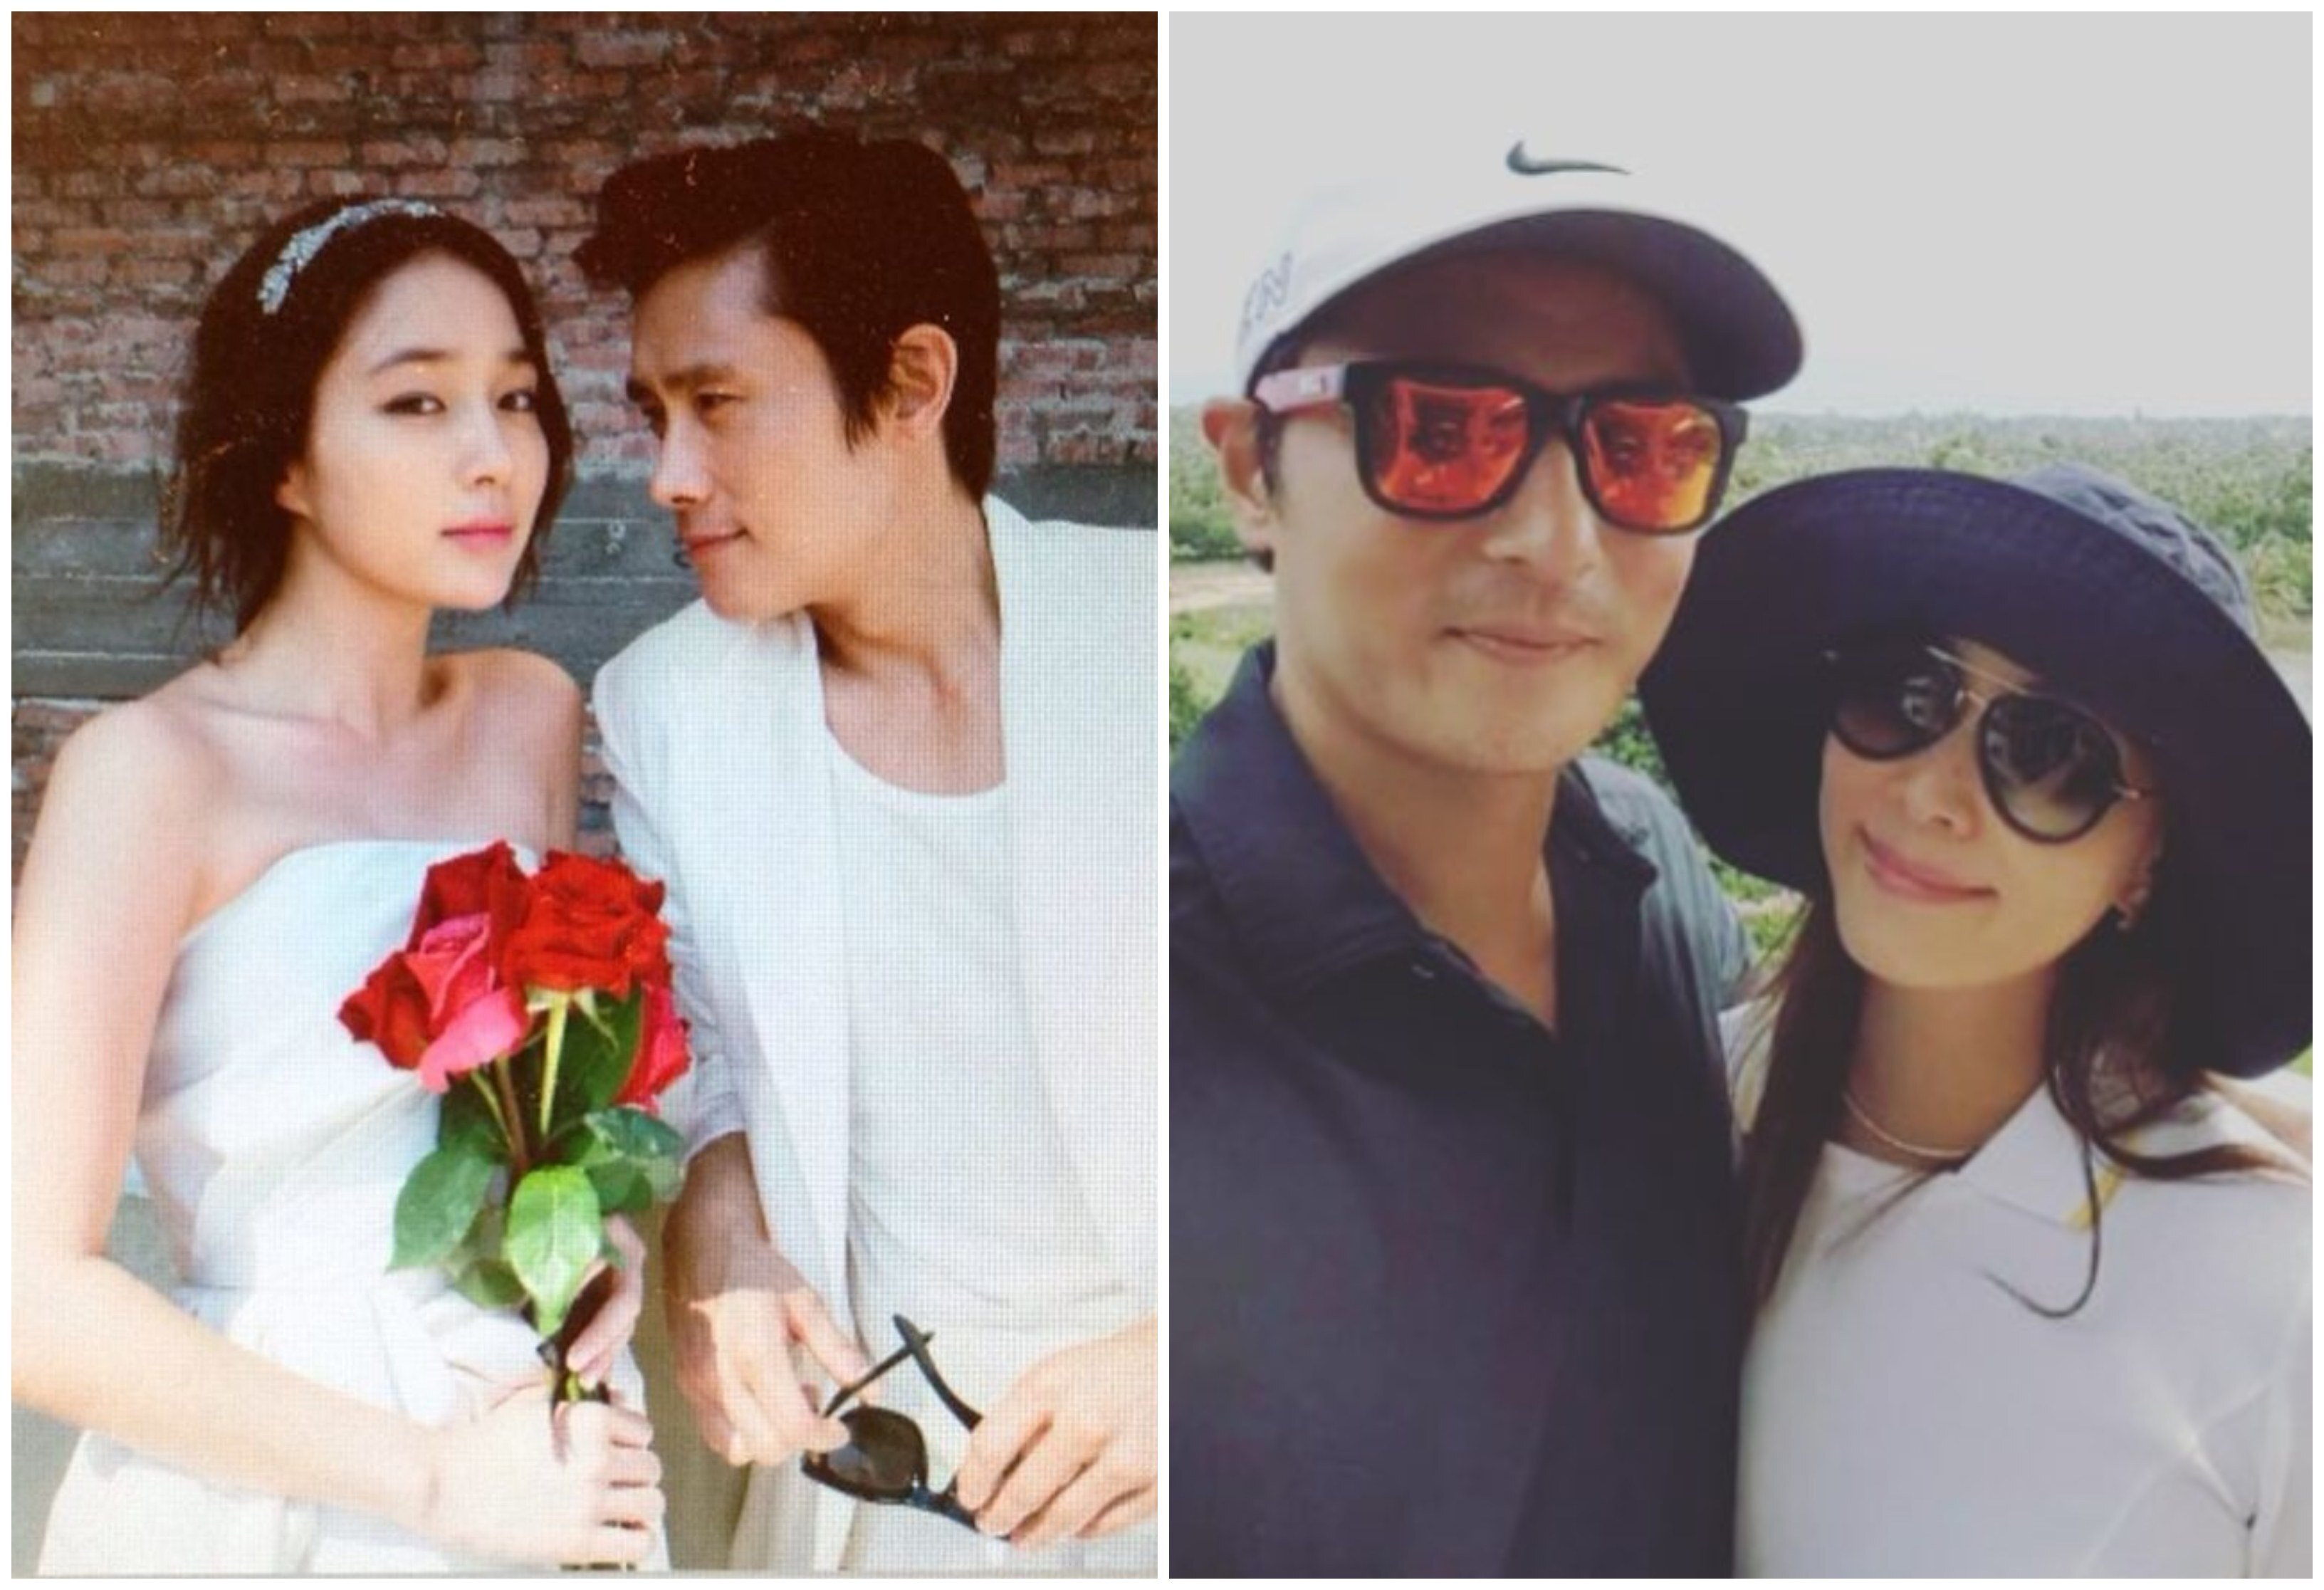 Jang Dong-gun and Ko So-young splurged US$5,300 on a single night in Bali for their honeymoon. Photos: @216jung/, @kosoyoung_official/Instagram